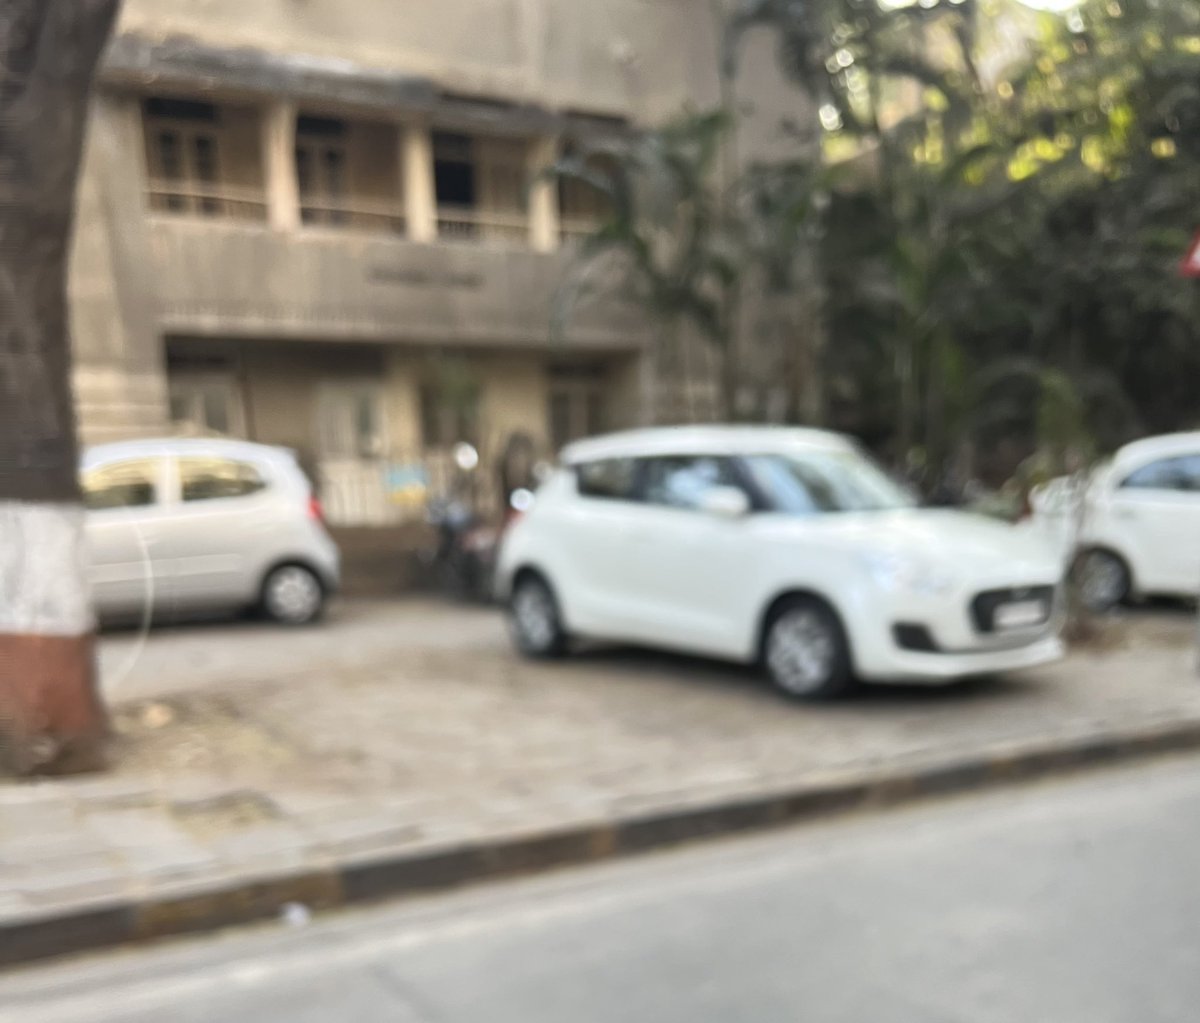 Unless there is complicity between politicians, @MTPHereToHelp & @mybmcWardFN officers not possible for Cars to blatantly park on broad footpaths of FNorth @MumbaiPolice @WadalaForum @IqbalSinghChah2 @mumbaimatterz @RoadsOfMumbai @MNCDFbombay #RoadSafetyWeek2023 #FreeOurFootpaths